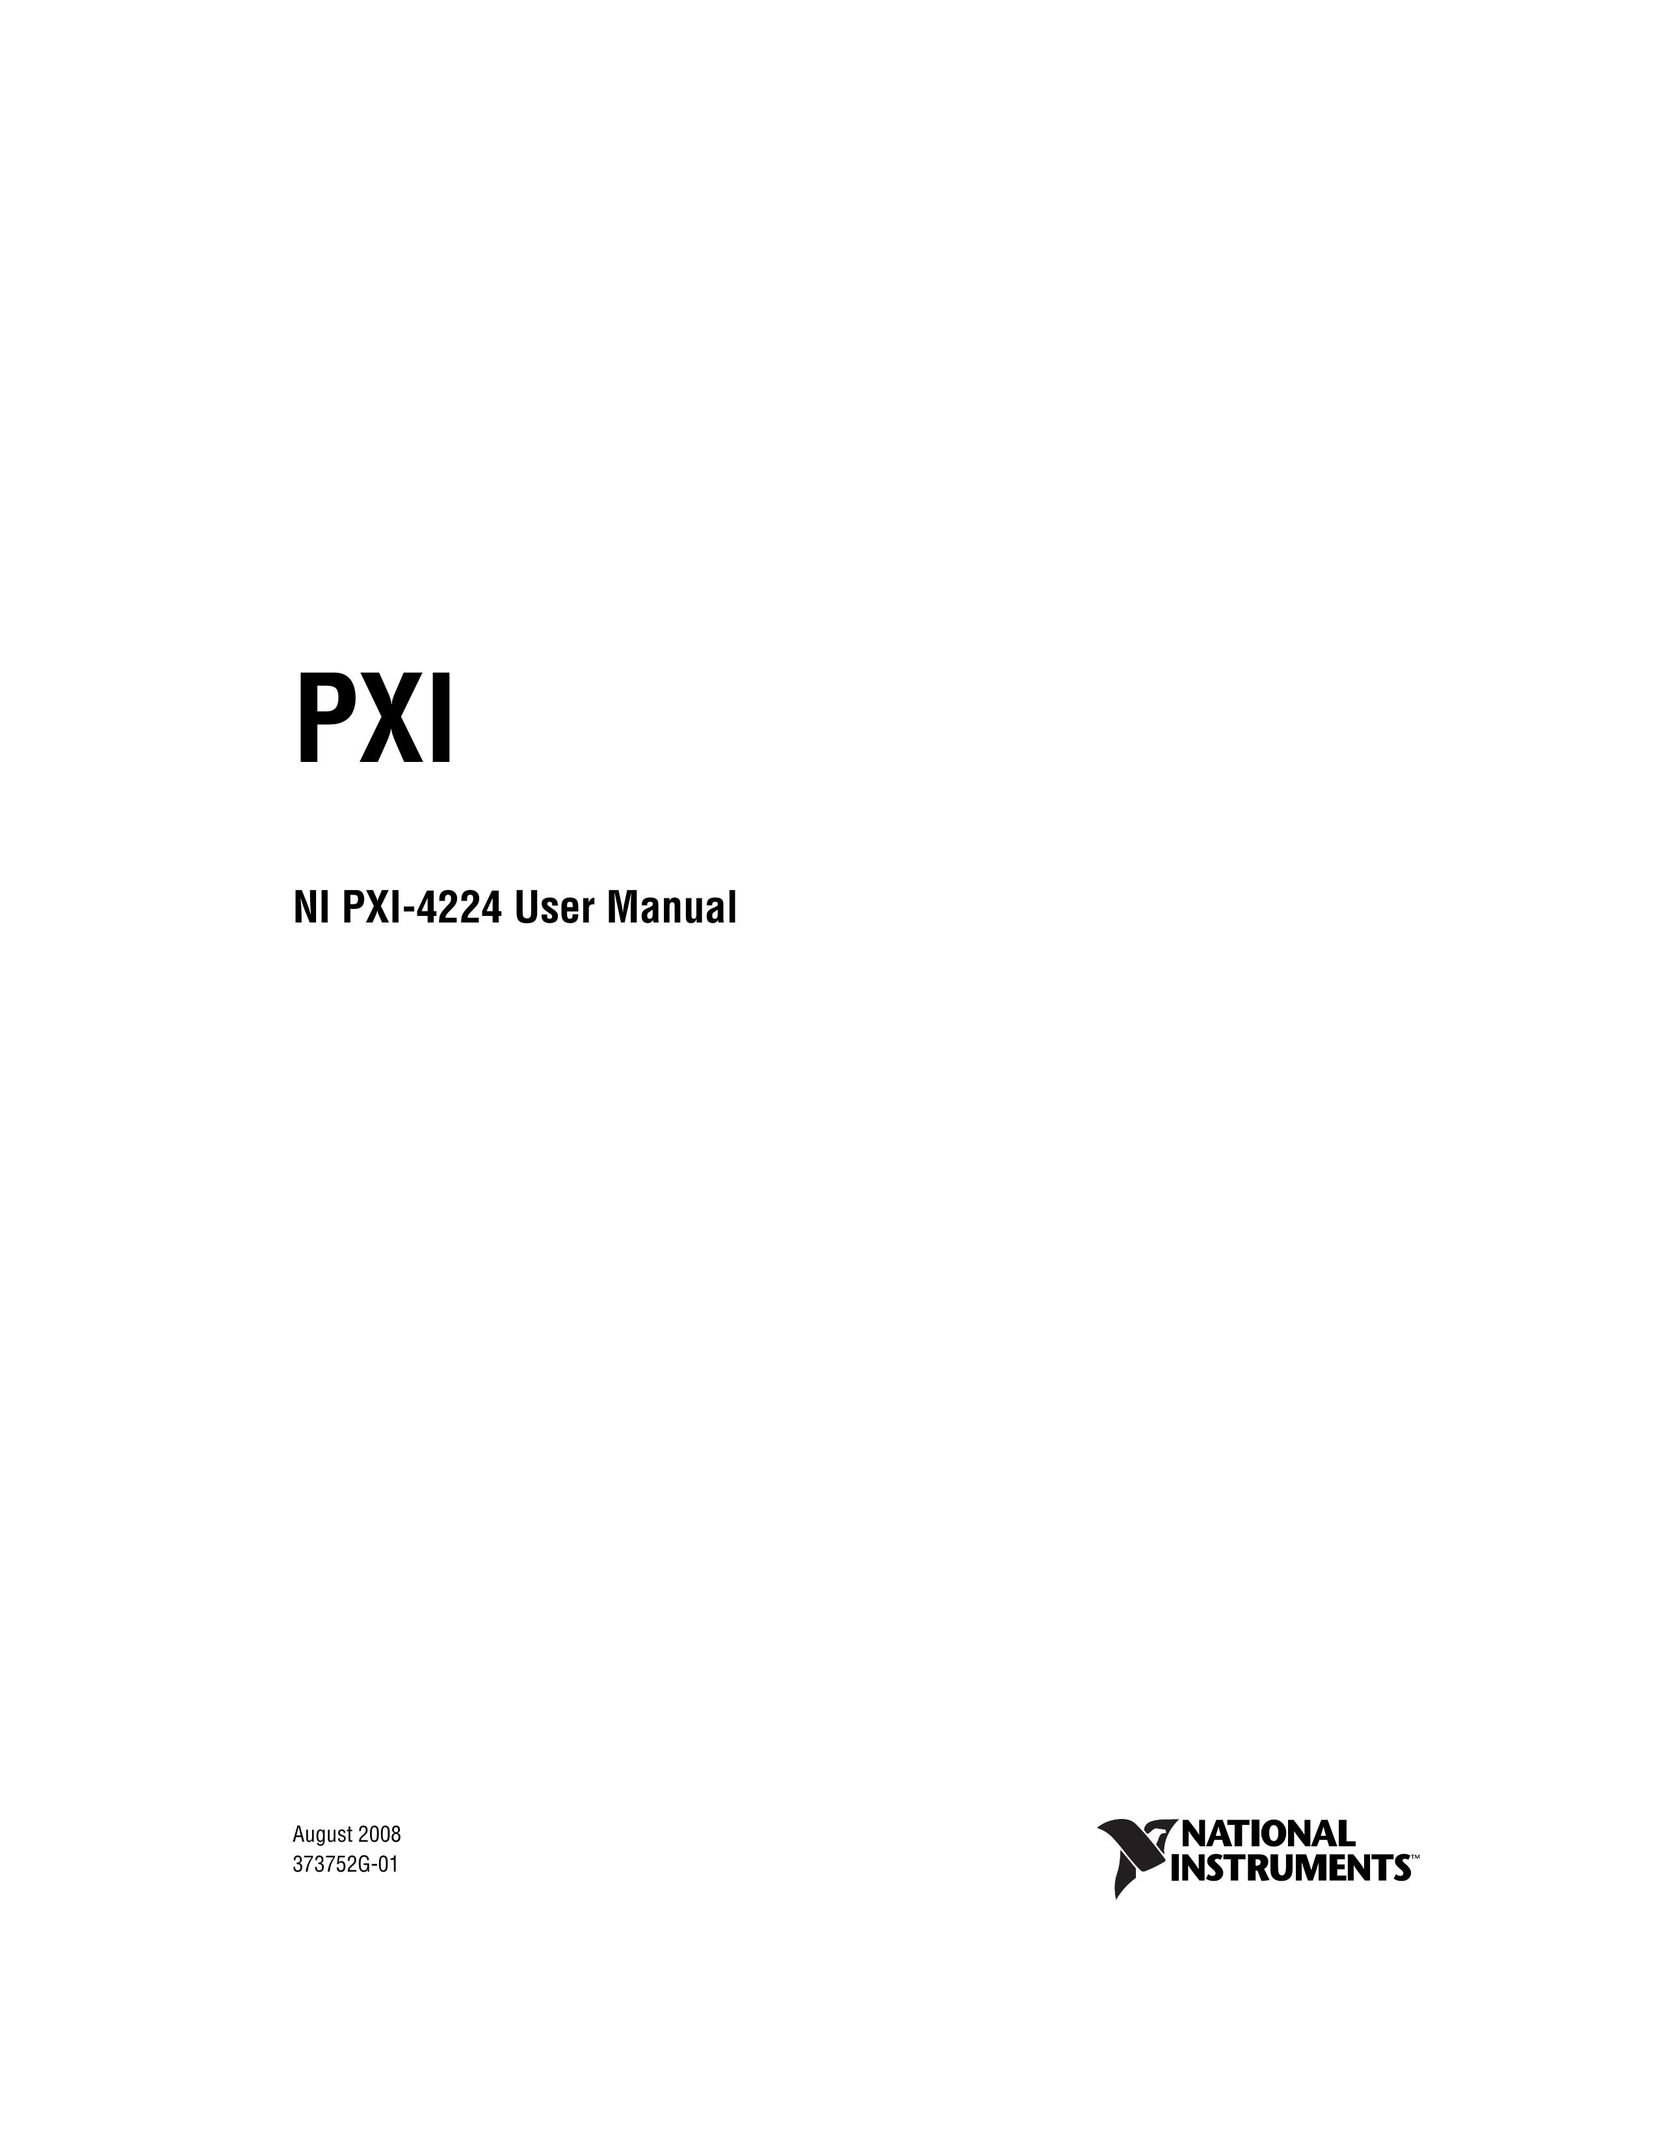 National Instruments NI PXI-4224 Stereo Receiver User Manual